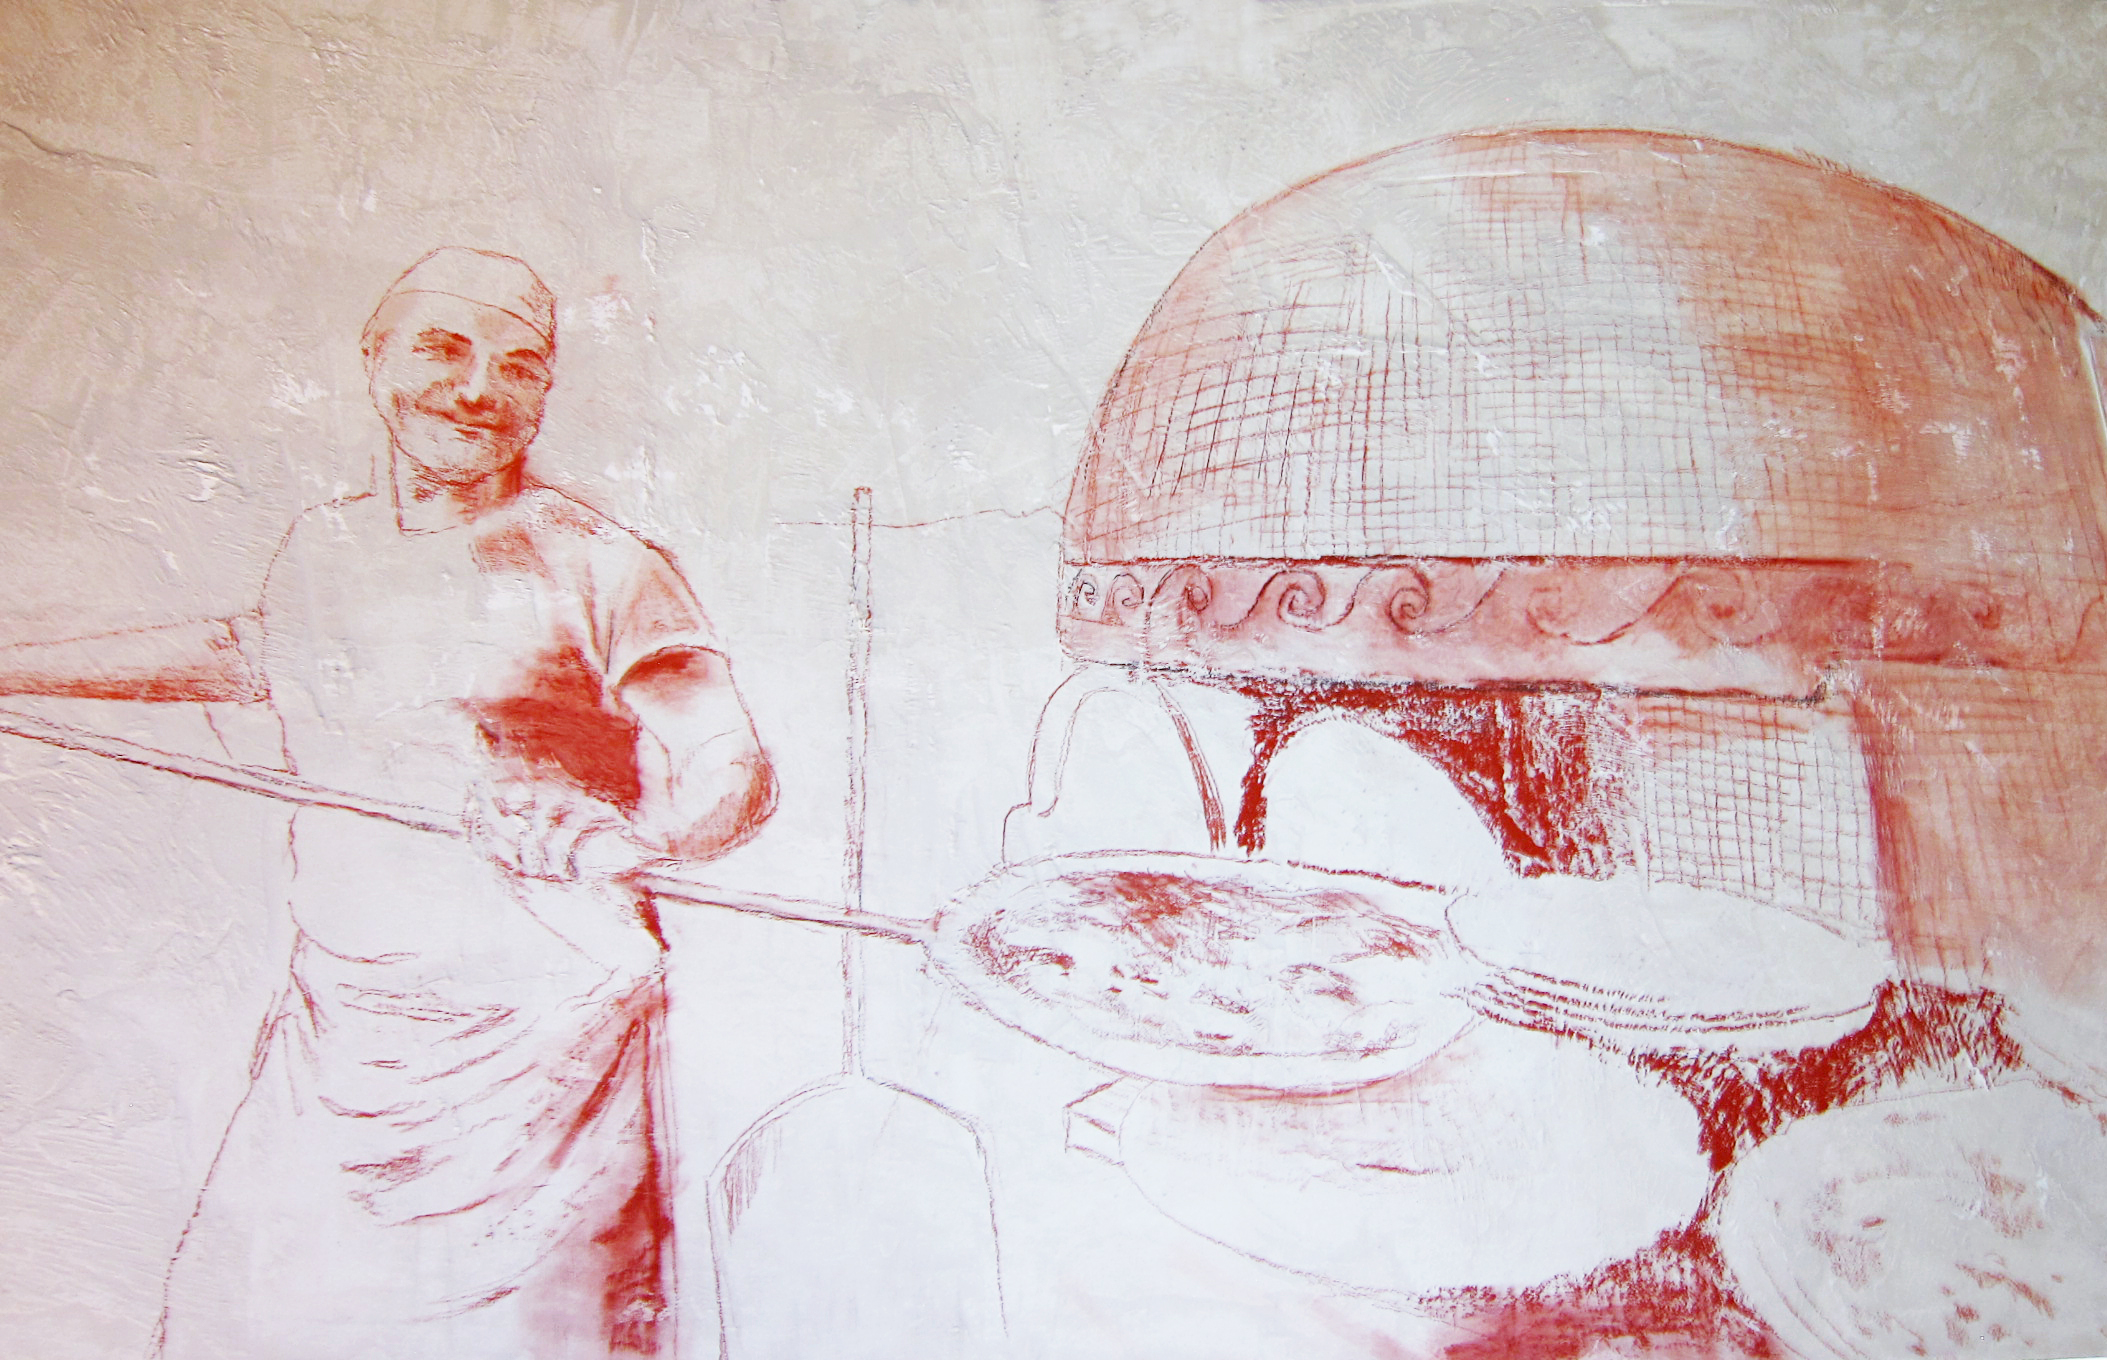 Jennifer’s mural begins with an image of “Il Pizzaiolo” (pizza maker) Tonino Topolino - a native of Naples who has long served as a culinary inspiration at the Molinaro restaurants.